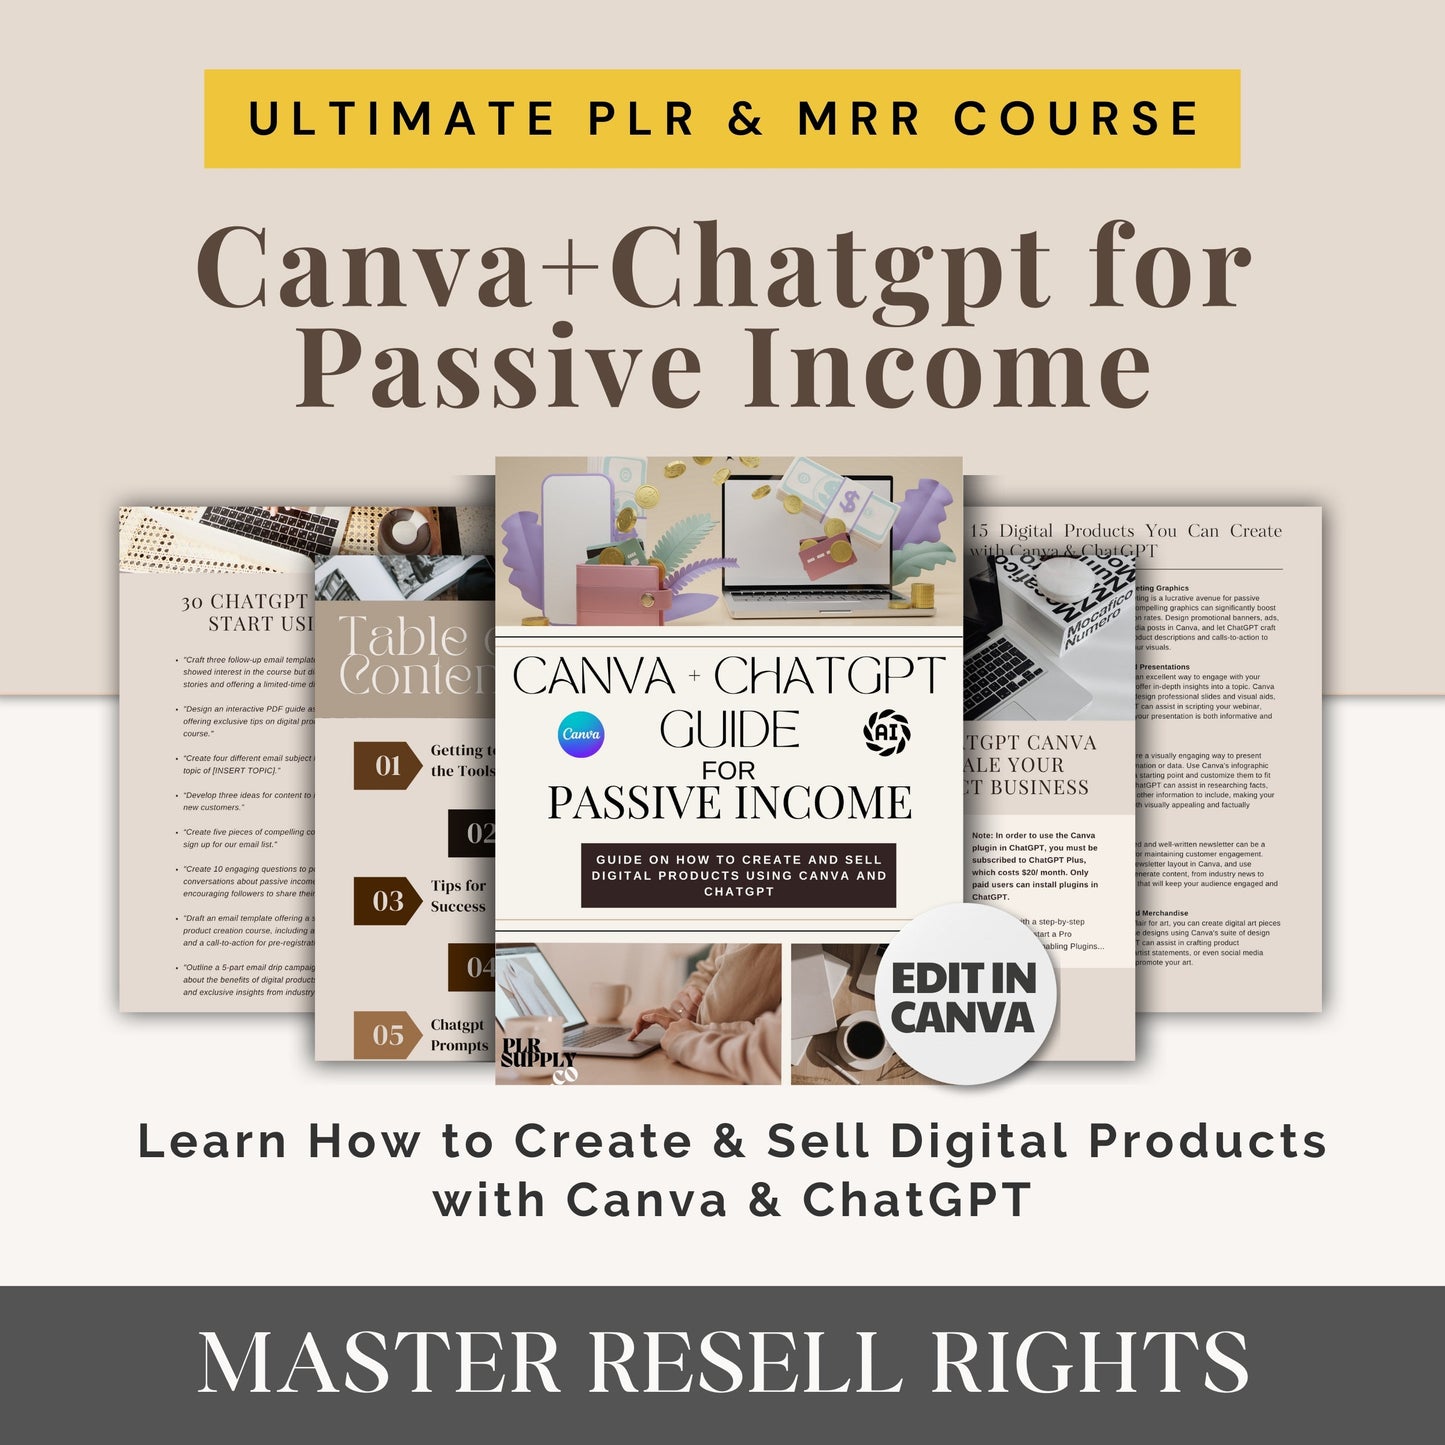 Chatgpt & Canva for Passive Income Course with Resell Rights- DFY Digital Product